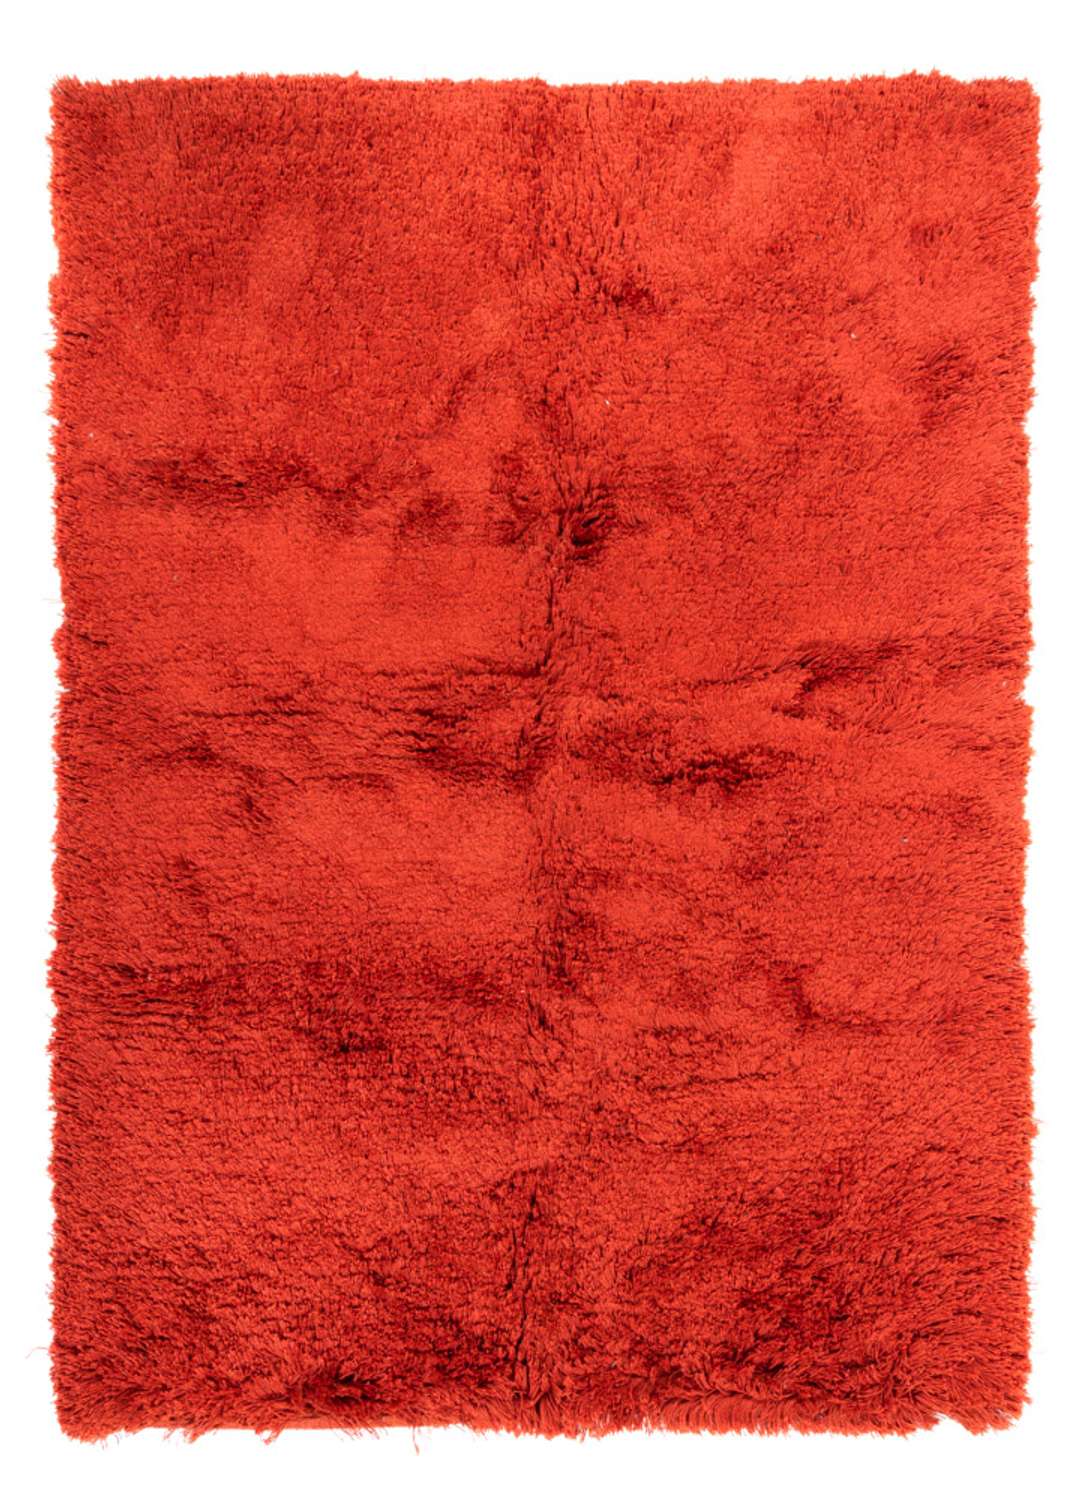 High-Pile Rug - 230 x 160 cm - red